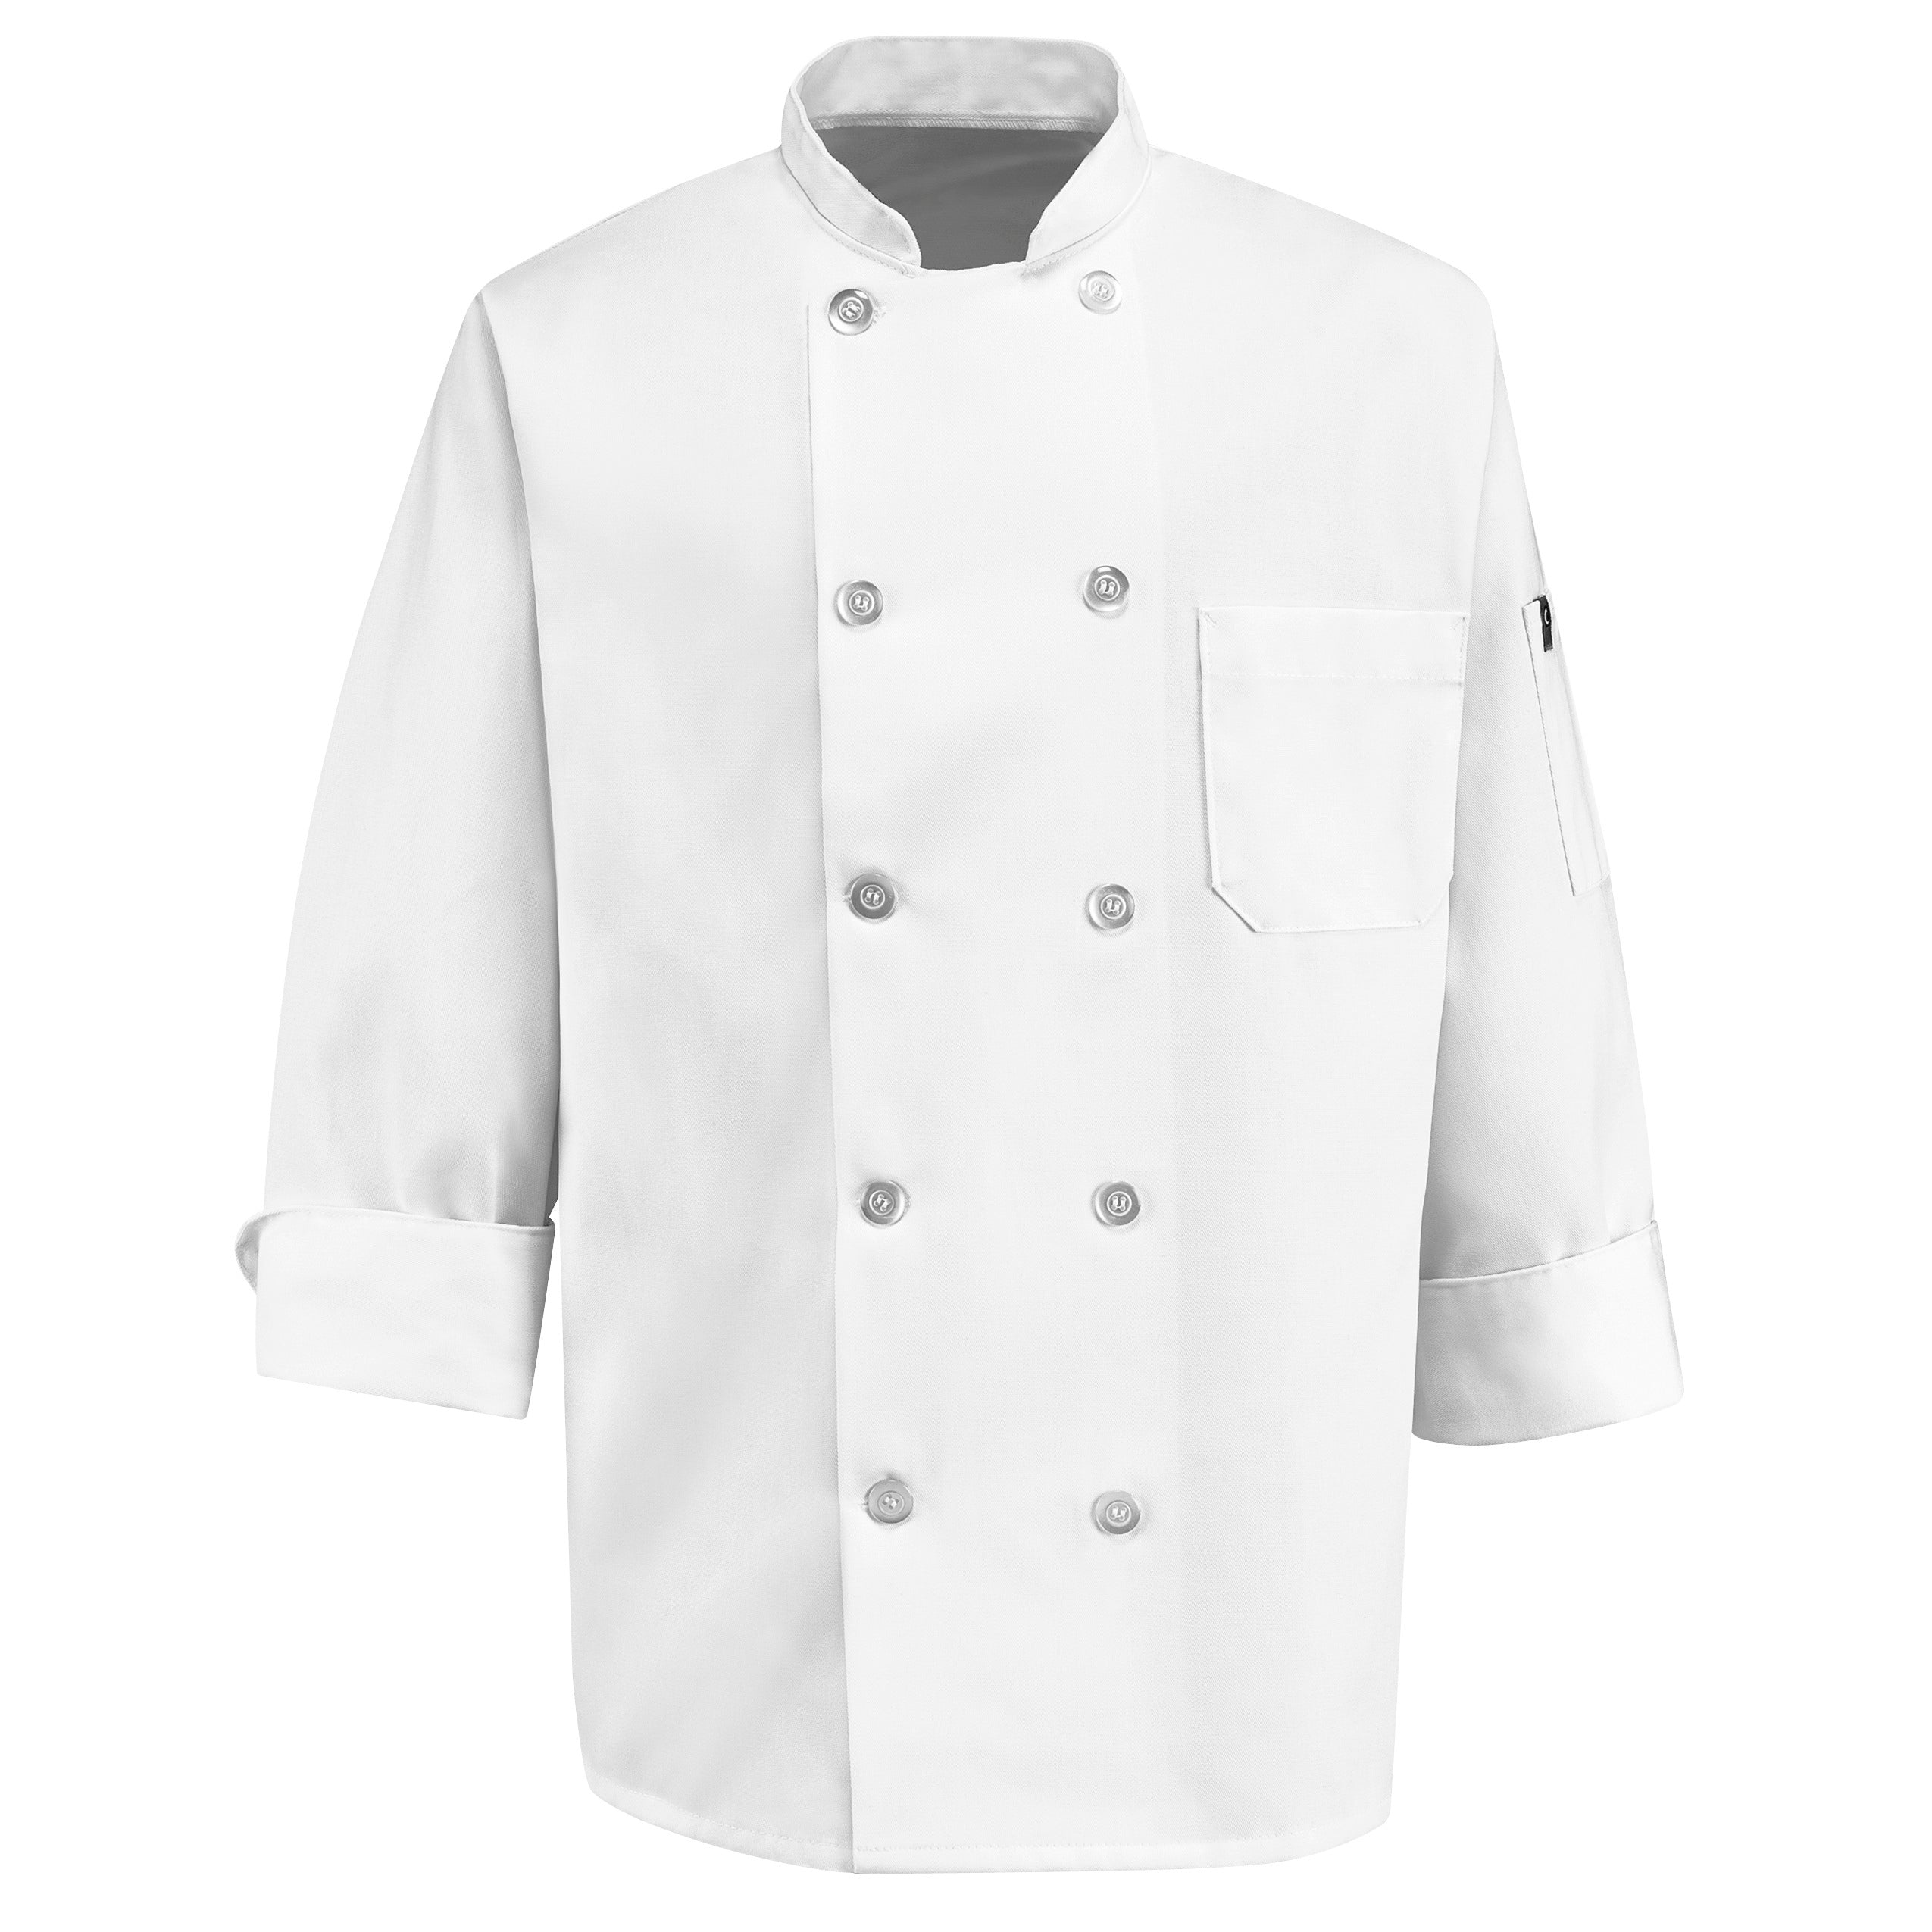 Ten Pearl Button Chef Coat 0423 - White-eSafety Supplies, Inc